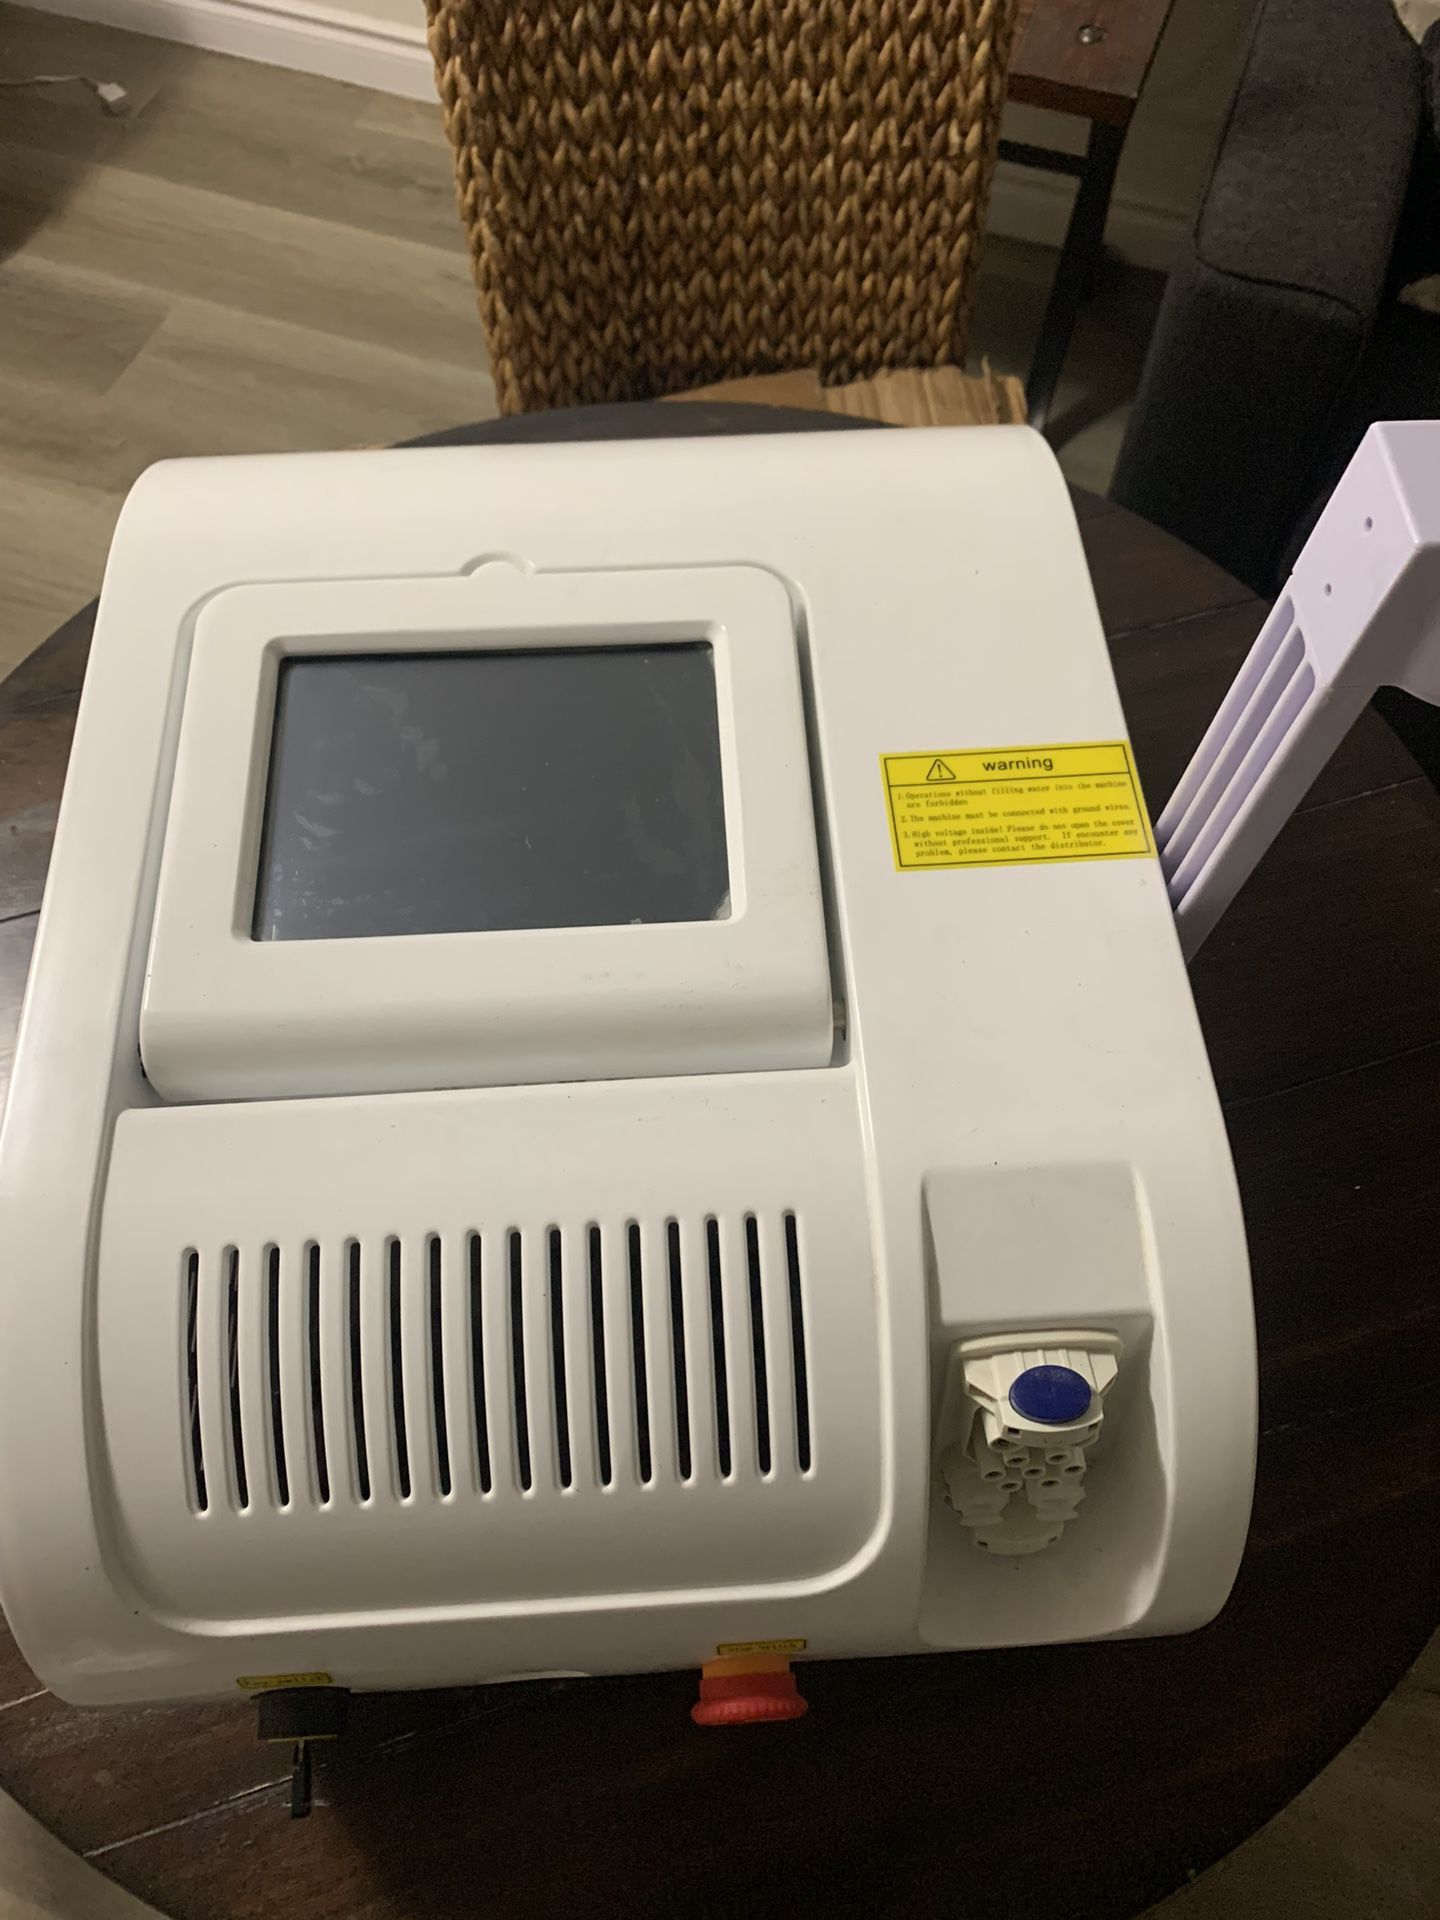 Professional Laser Hair Removal Machine 